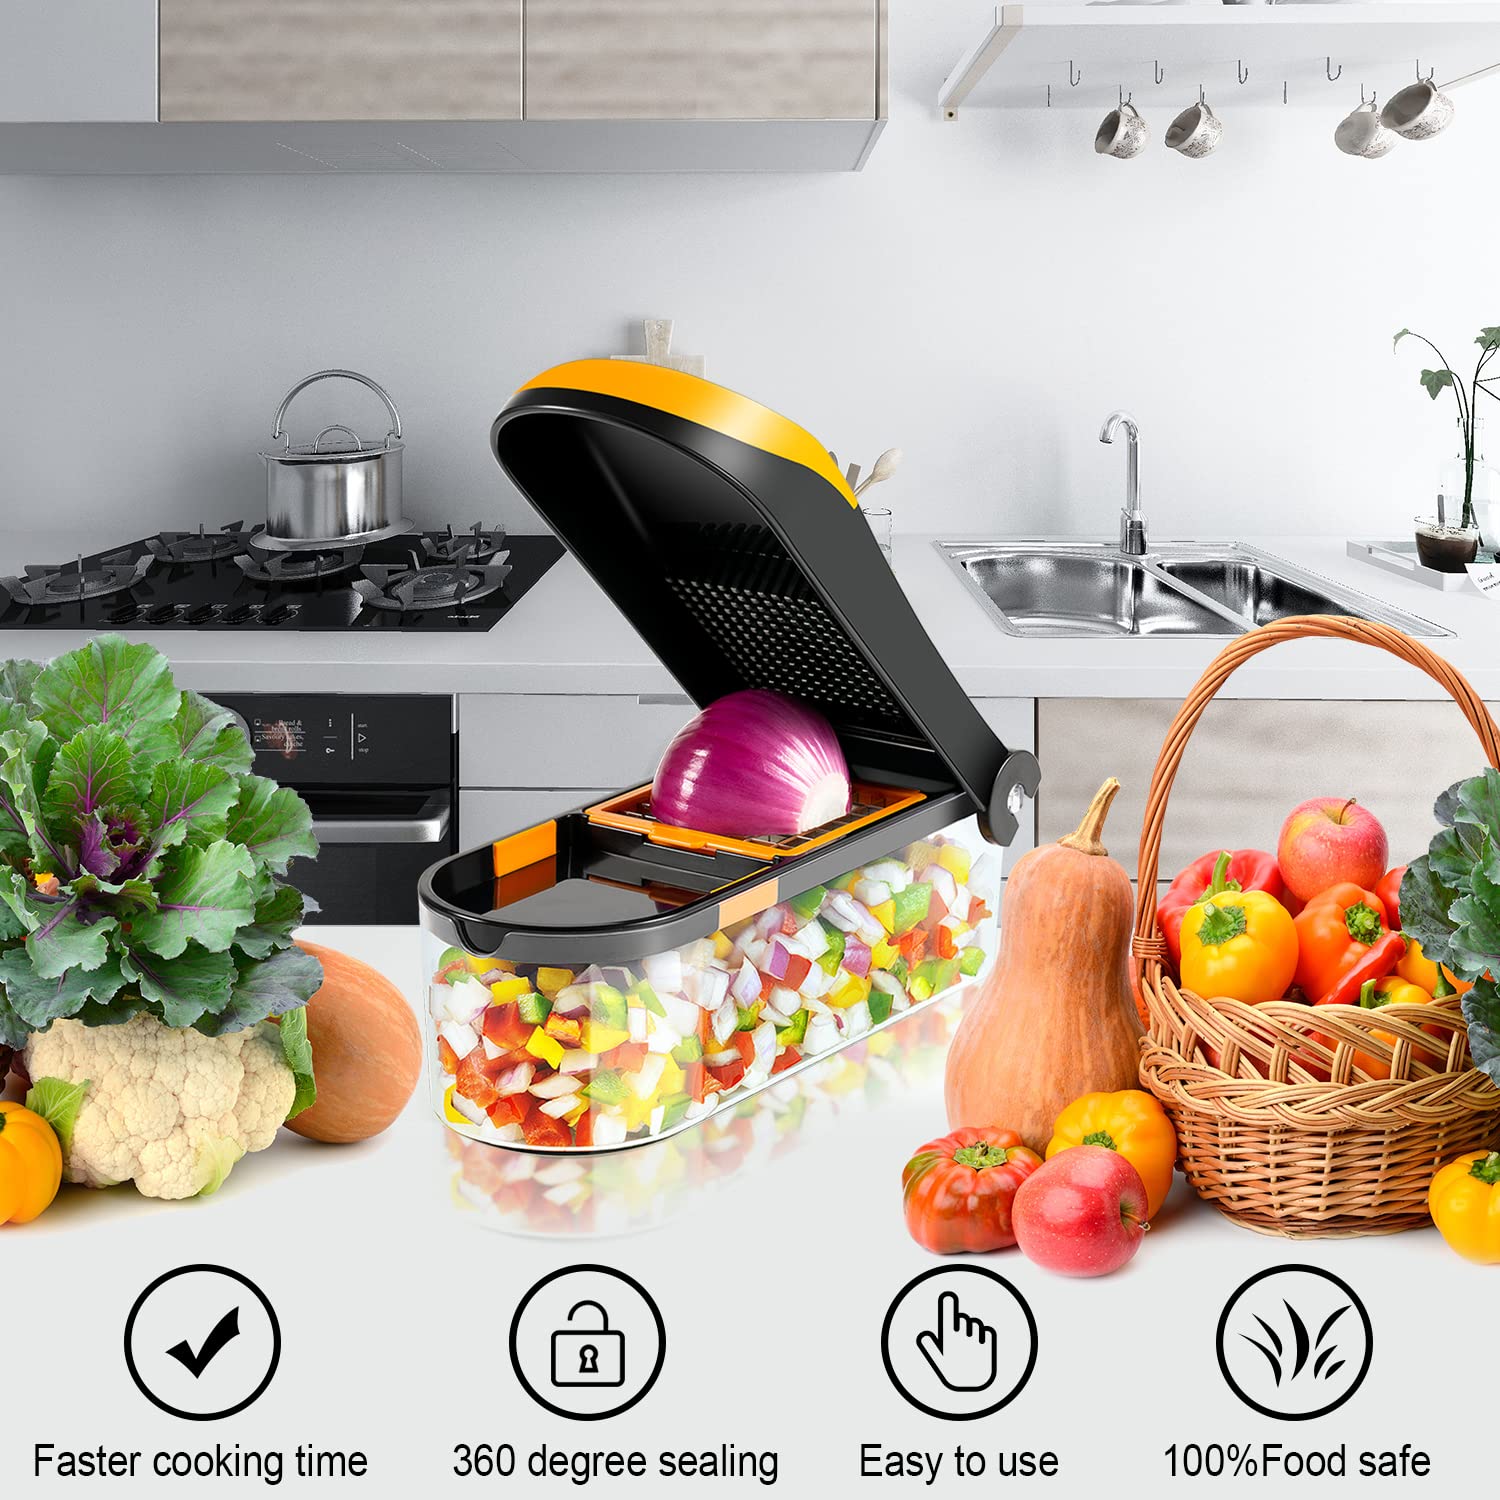 Vegetable chopper 19 in 1, Multifunctional Veggie, Onion & Food chopper, Dicer, cutter With Container With Resistant Glove, Peeler, 9 Blades